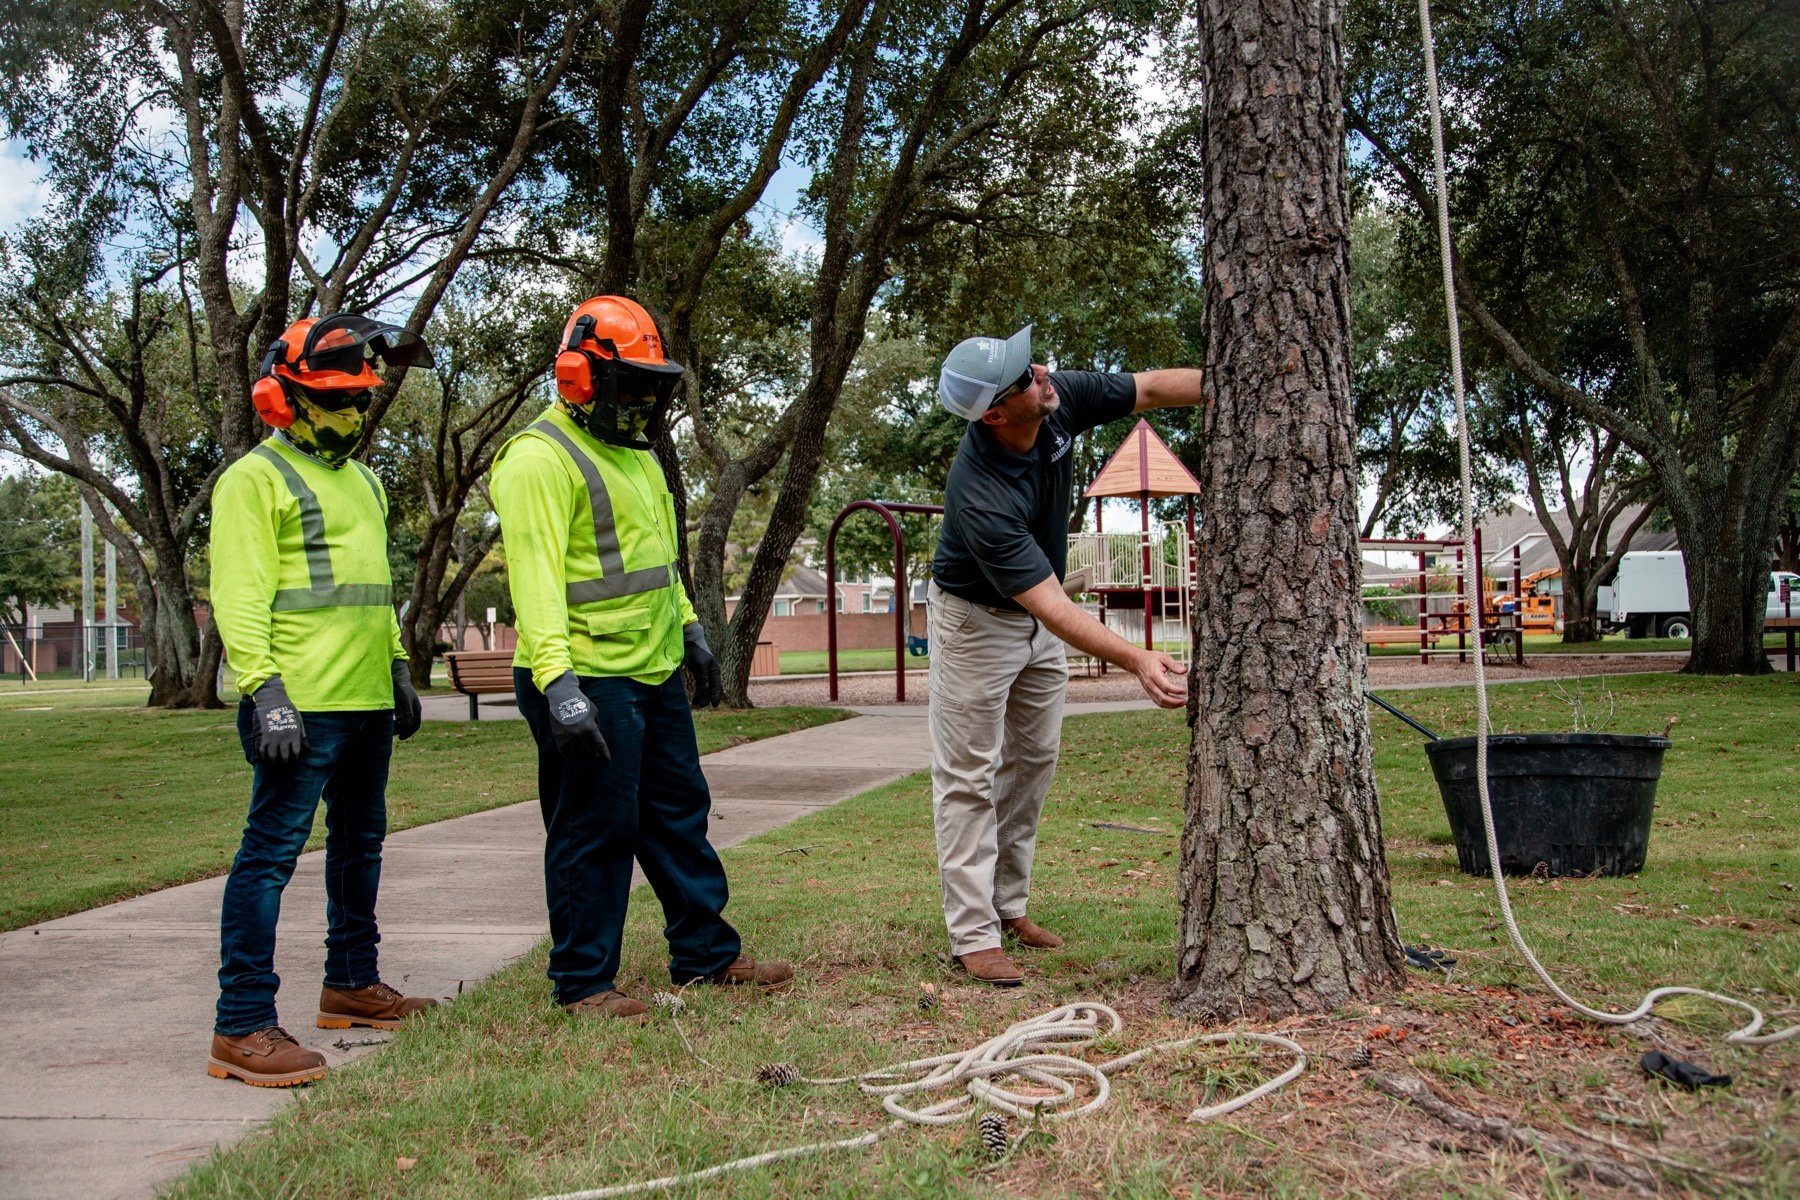 commercial tree service crew inspecting a tree for safety